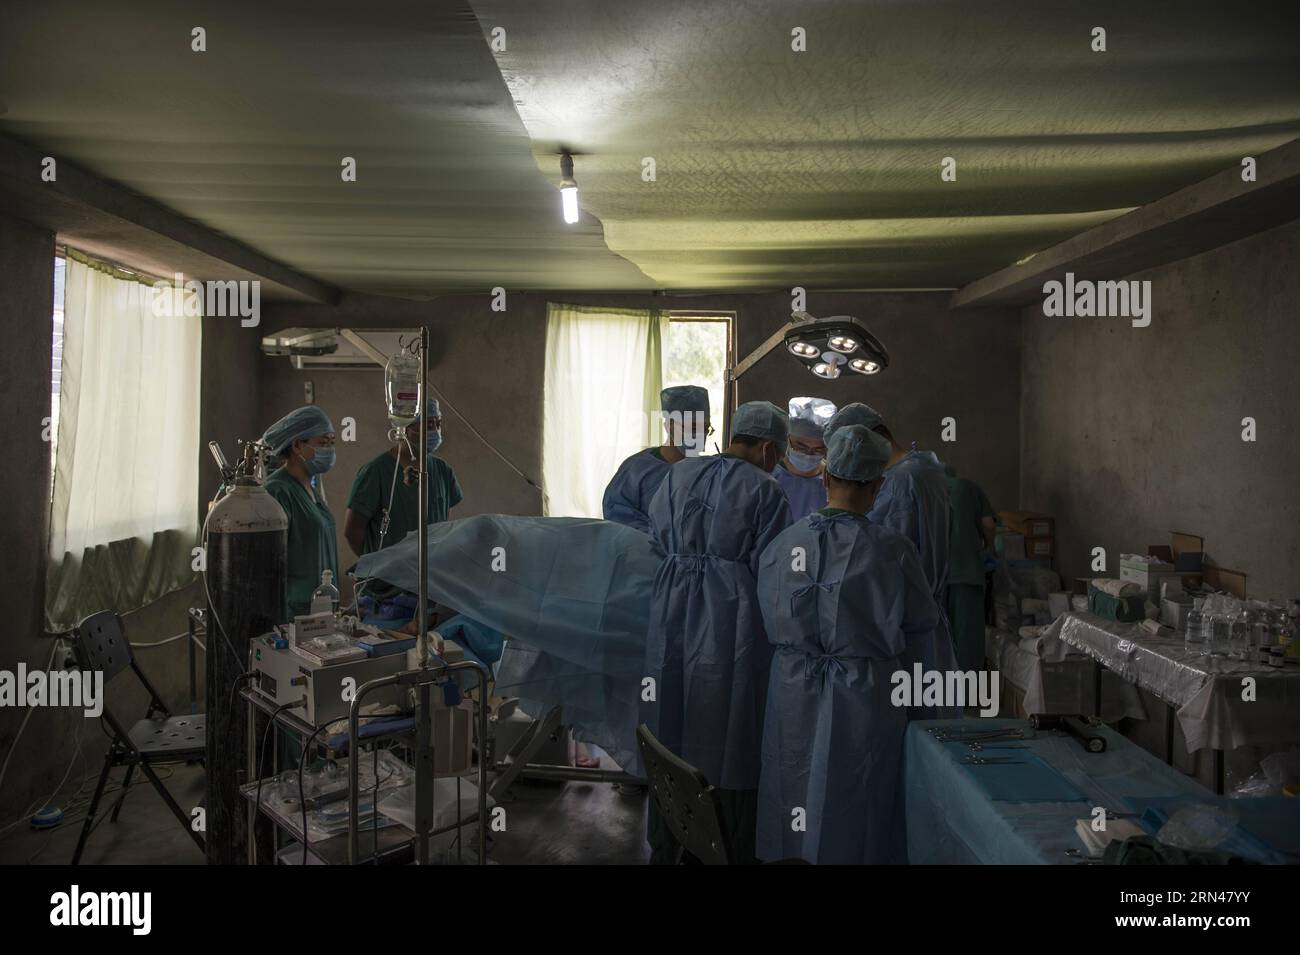 Doctors and nurses of emergency department of China s Chengdu Military Region Medical Team perform a surgery in an operating room at a field hospital in Kathmandu, Nepal, May 10, 2015. Since the arrival, the Chengdu Military Region Medical Team, the only foreign aid team capable of performing full-spectrum bone- related surgical operations, has treated over 200 patients, conducted more than 100 surgical operations, including 34 major ones. The team has also provided psychological counseling to nearly 500 people, and has disinfected a total area of over 850,000 square meters. In contrast to the Stock Photo